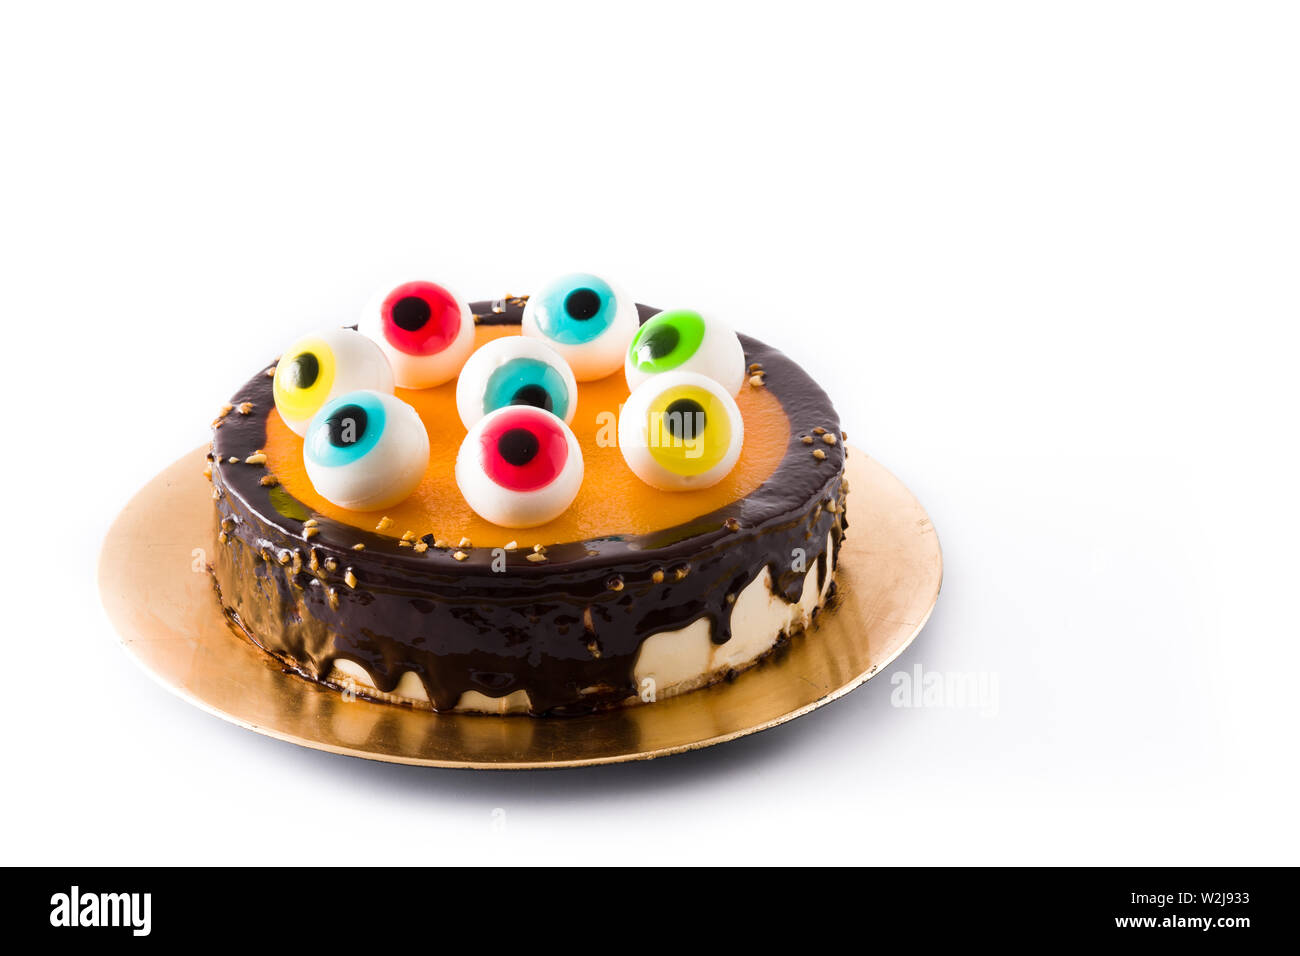 Halloween cake with candy eyes decoration isolated on white ...